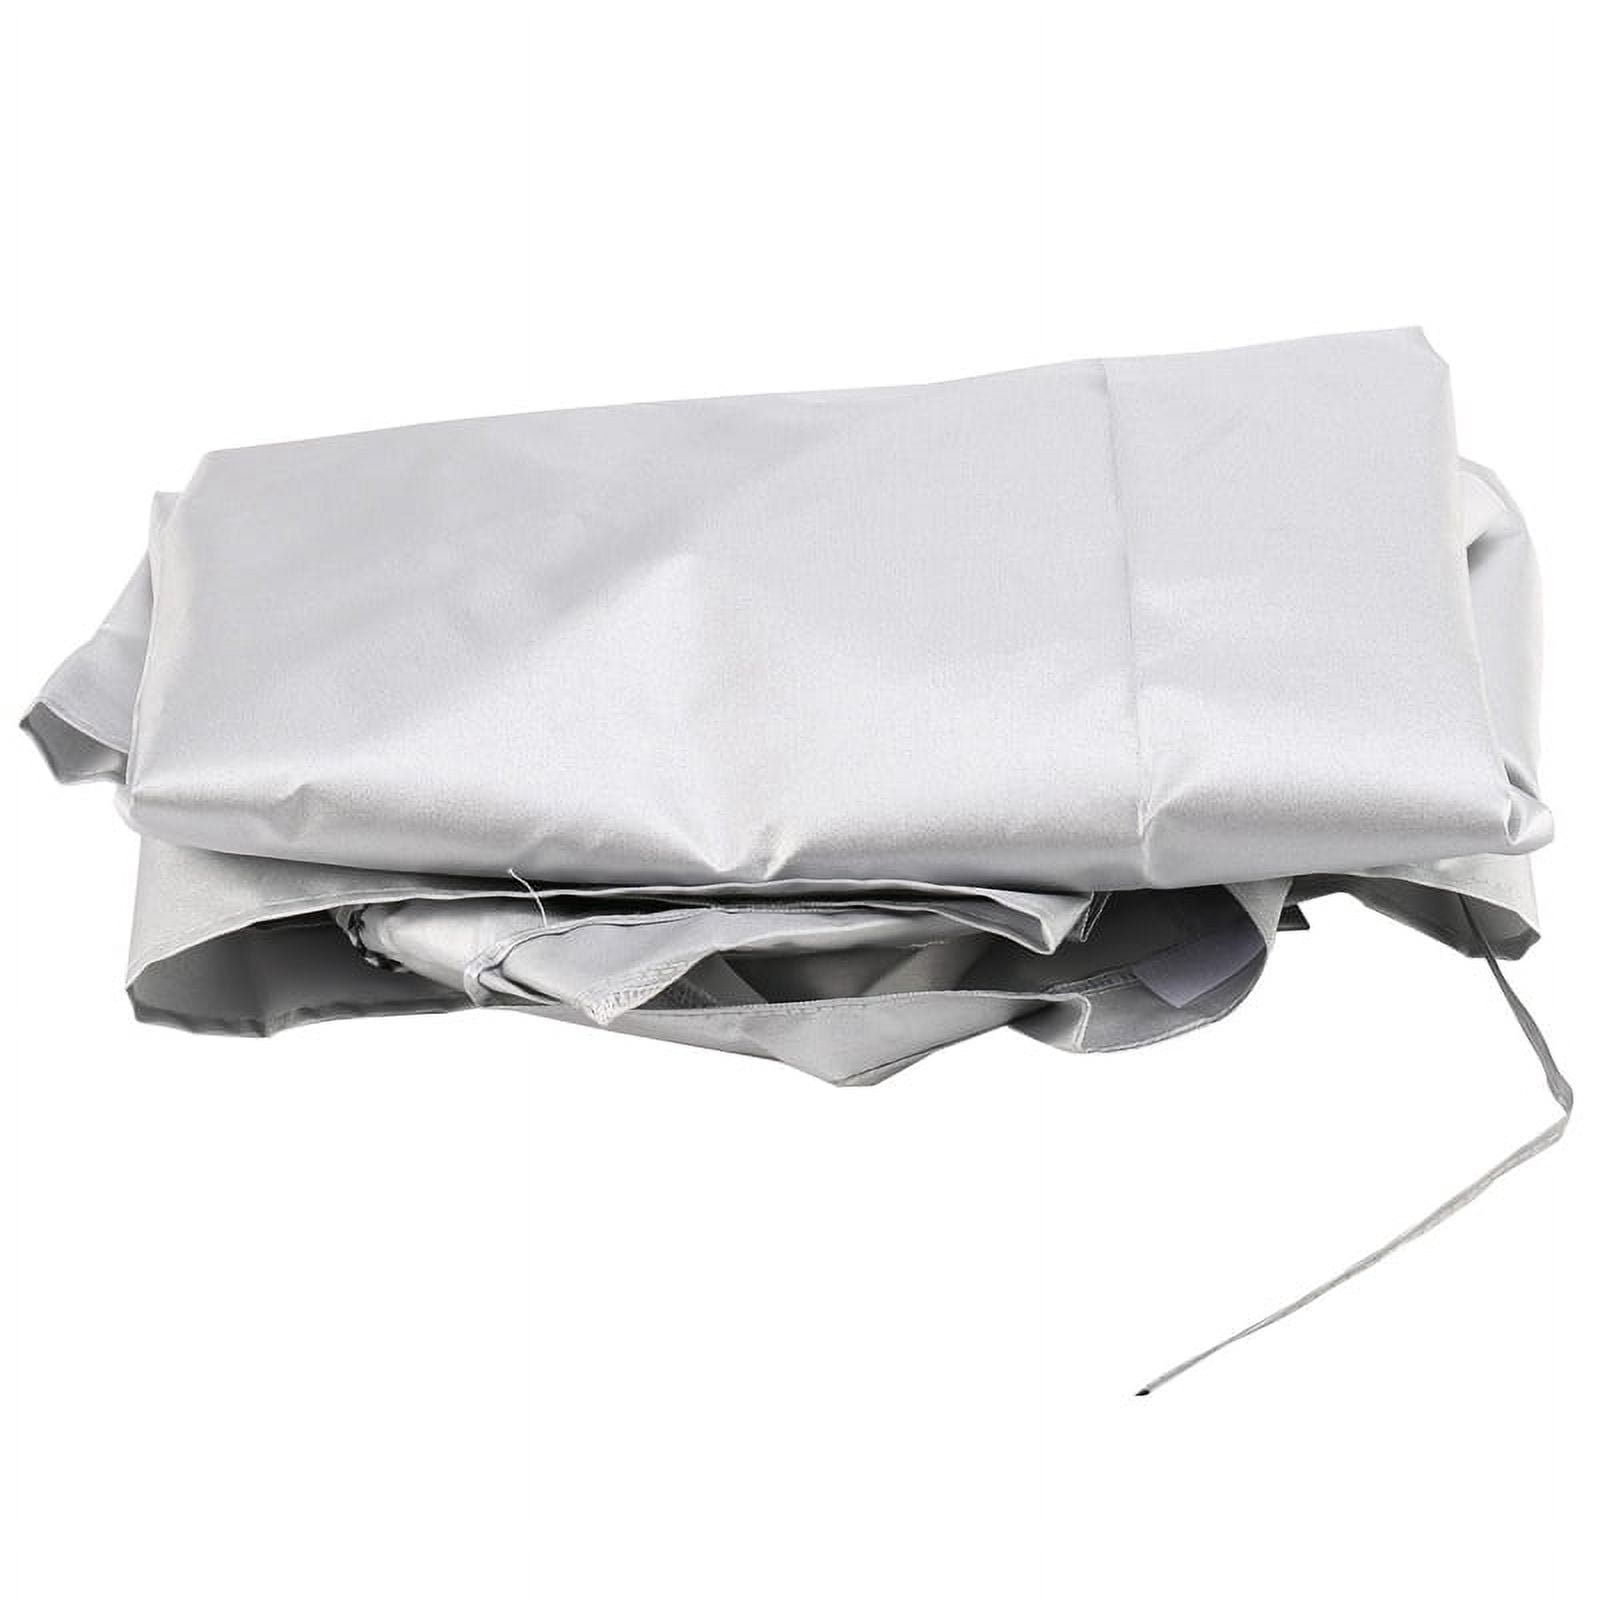 Portable ,Top Load Washer Dryer Cover,Waterproof for Fully-Automatic/Wheel  Washing Machine 